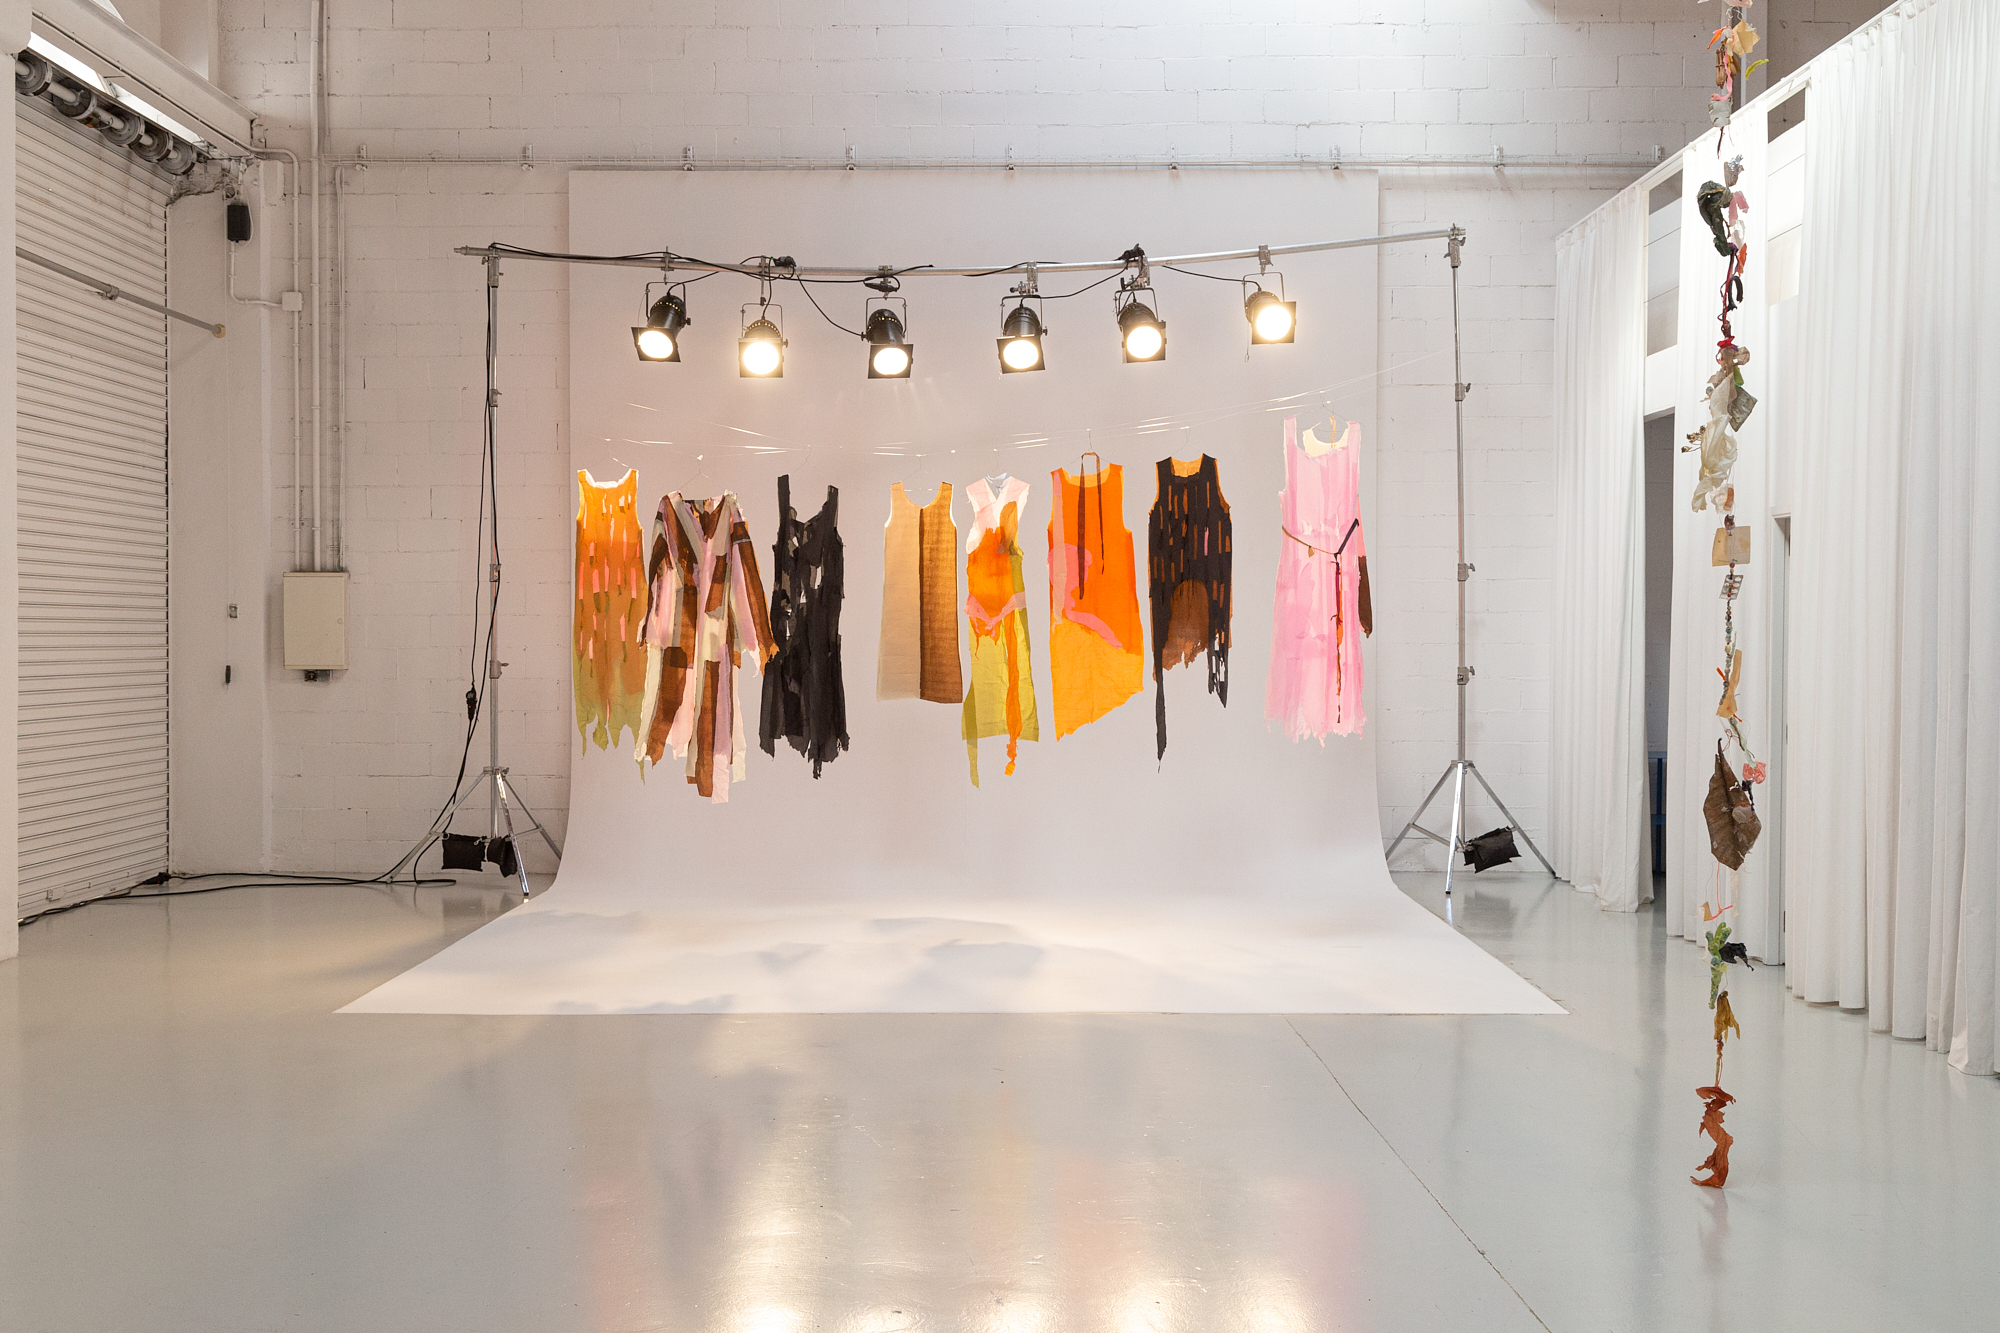 Installation View, Crepe Paper dresses, I still feel at home in my house, Albert Riera Galceran, 2022